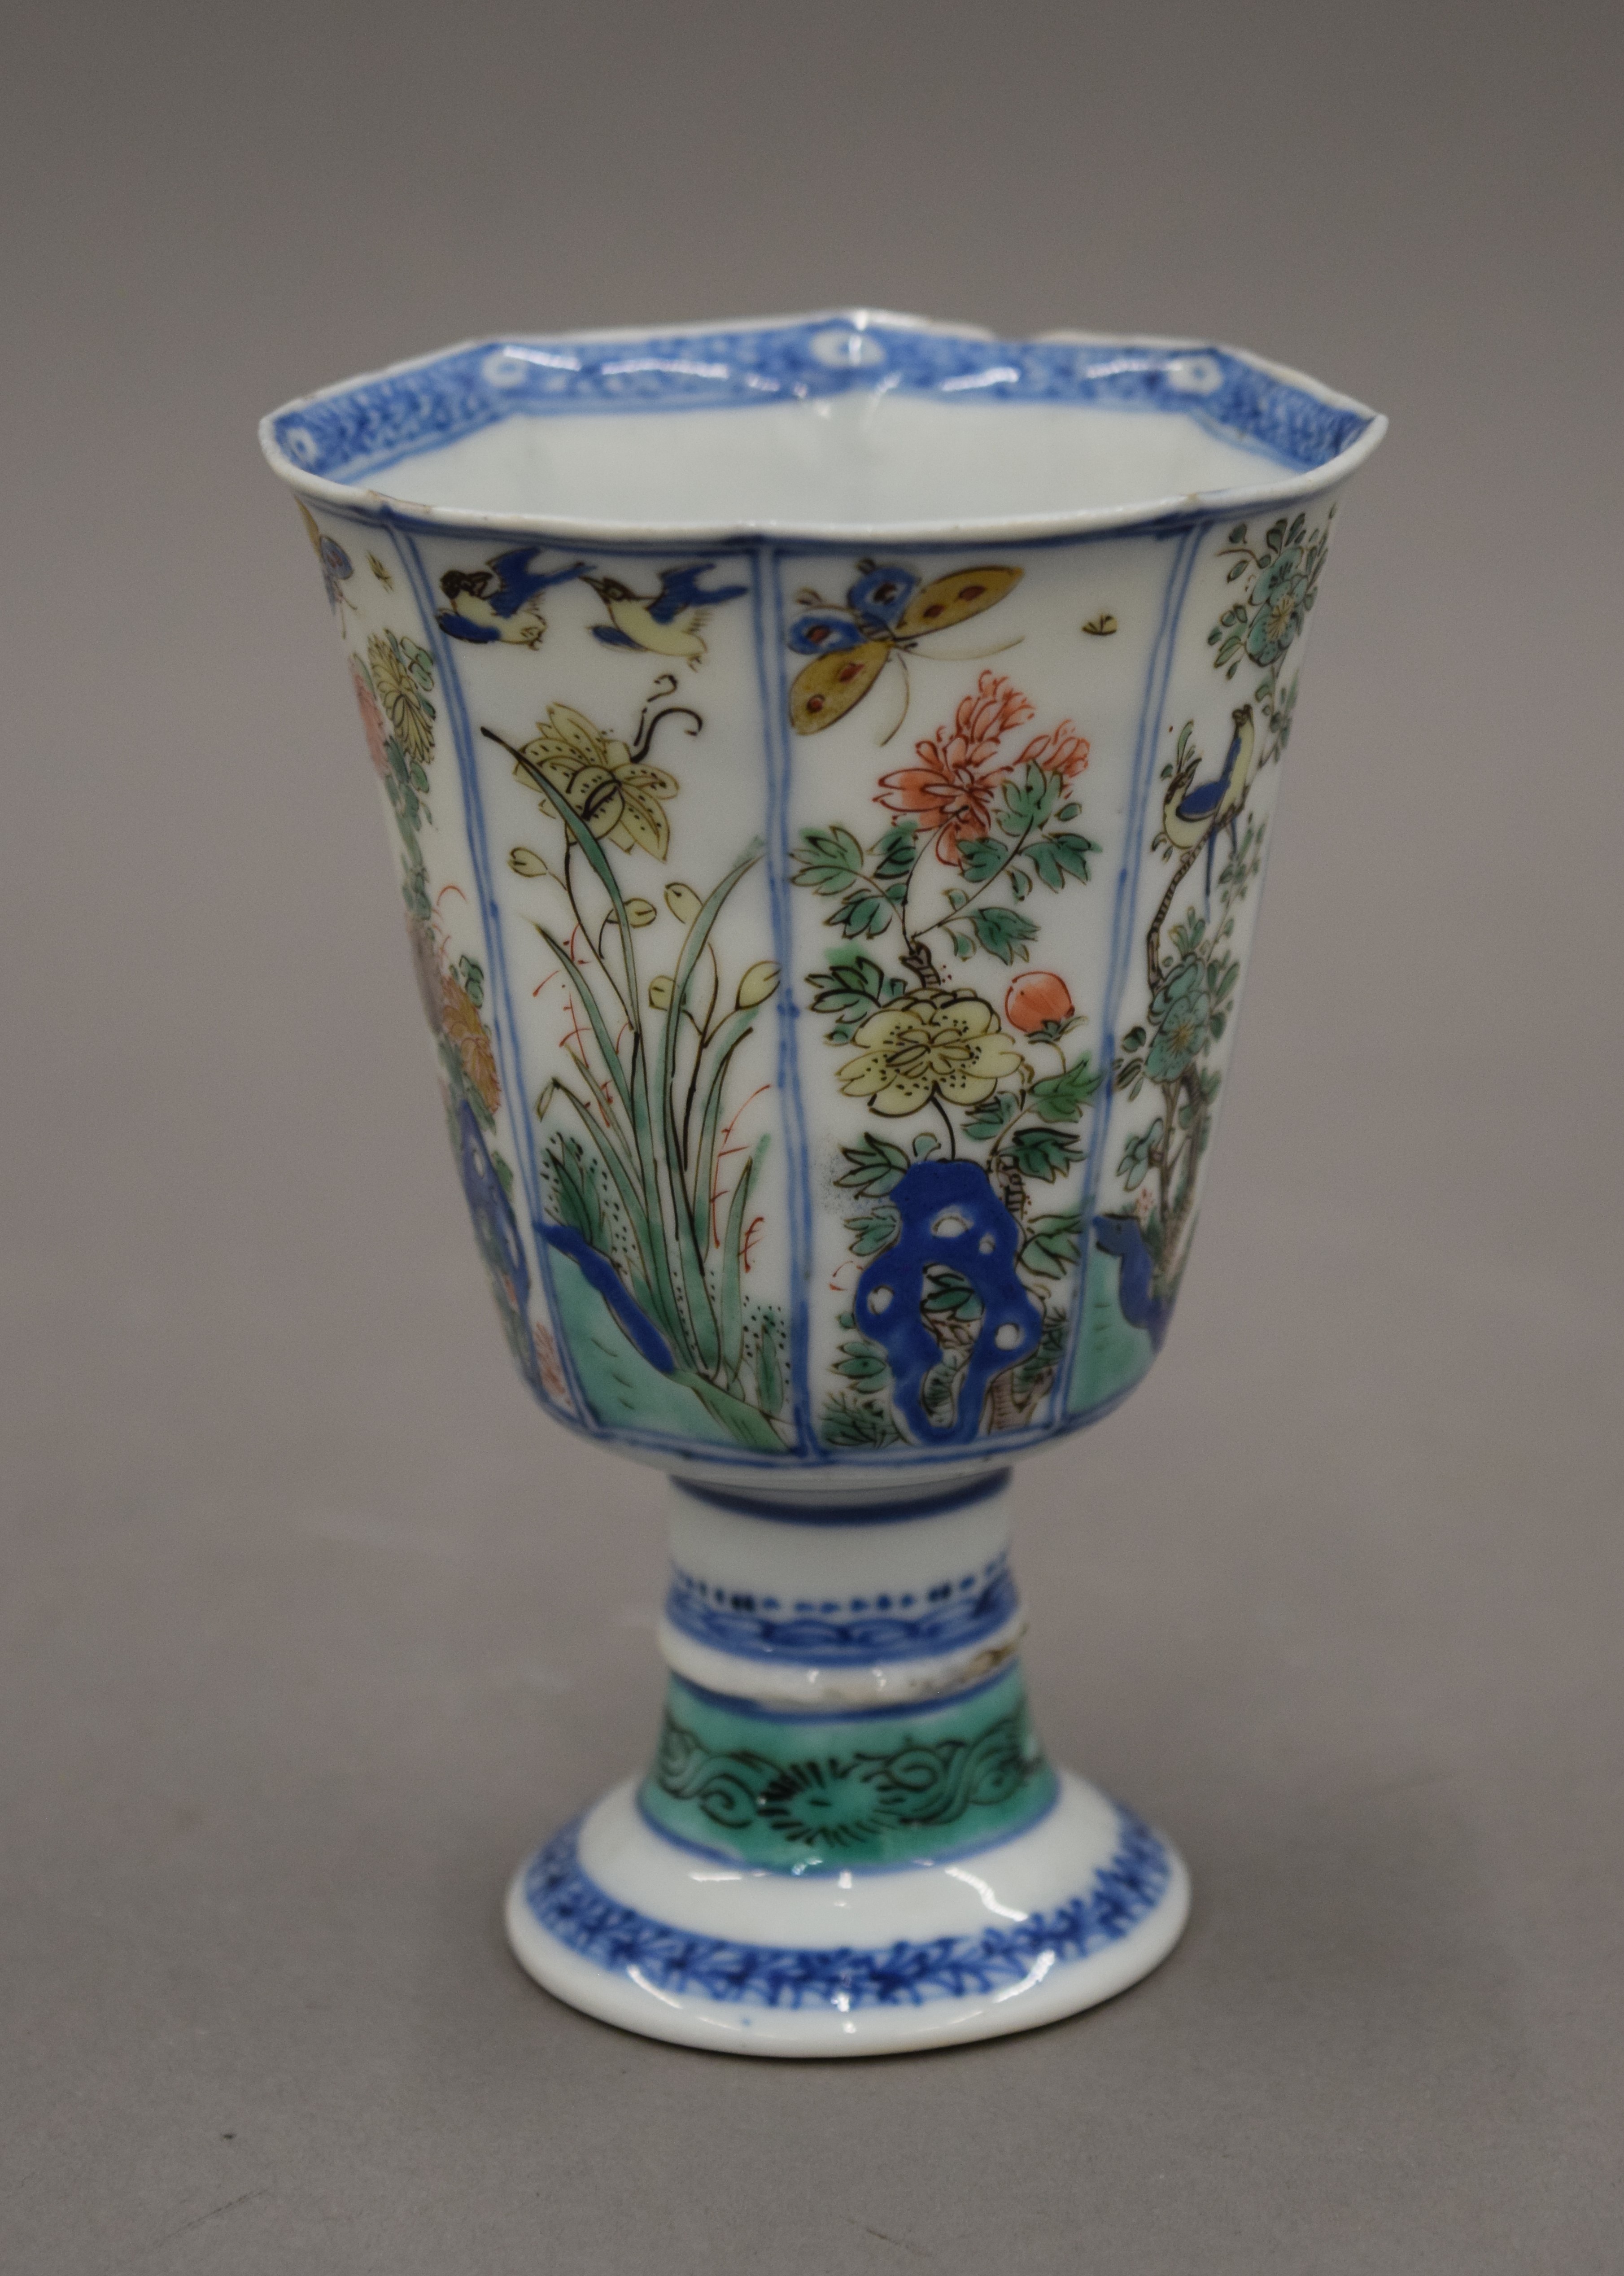 A Chinese Kangxi period octagonal famille verte porcelain stem cup. 11.5 cm high.